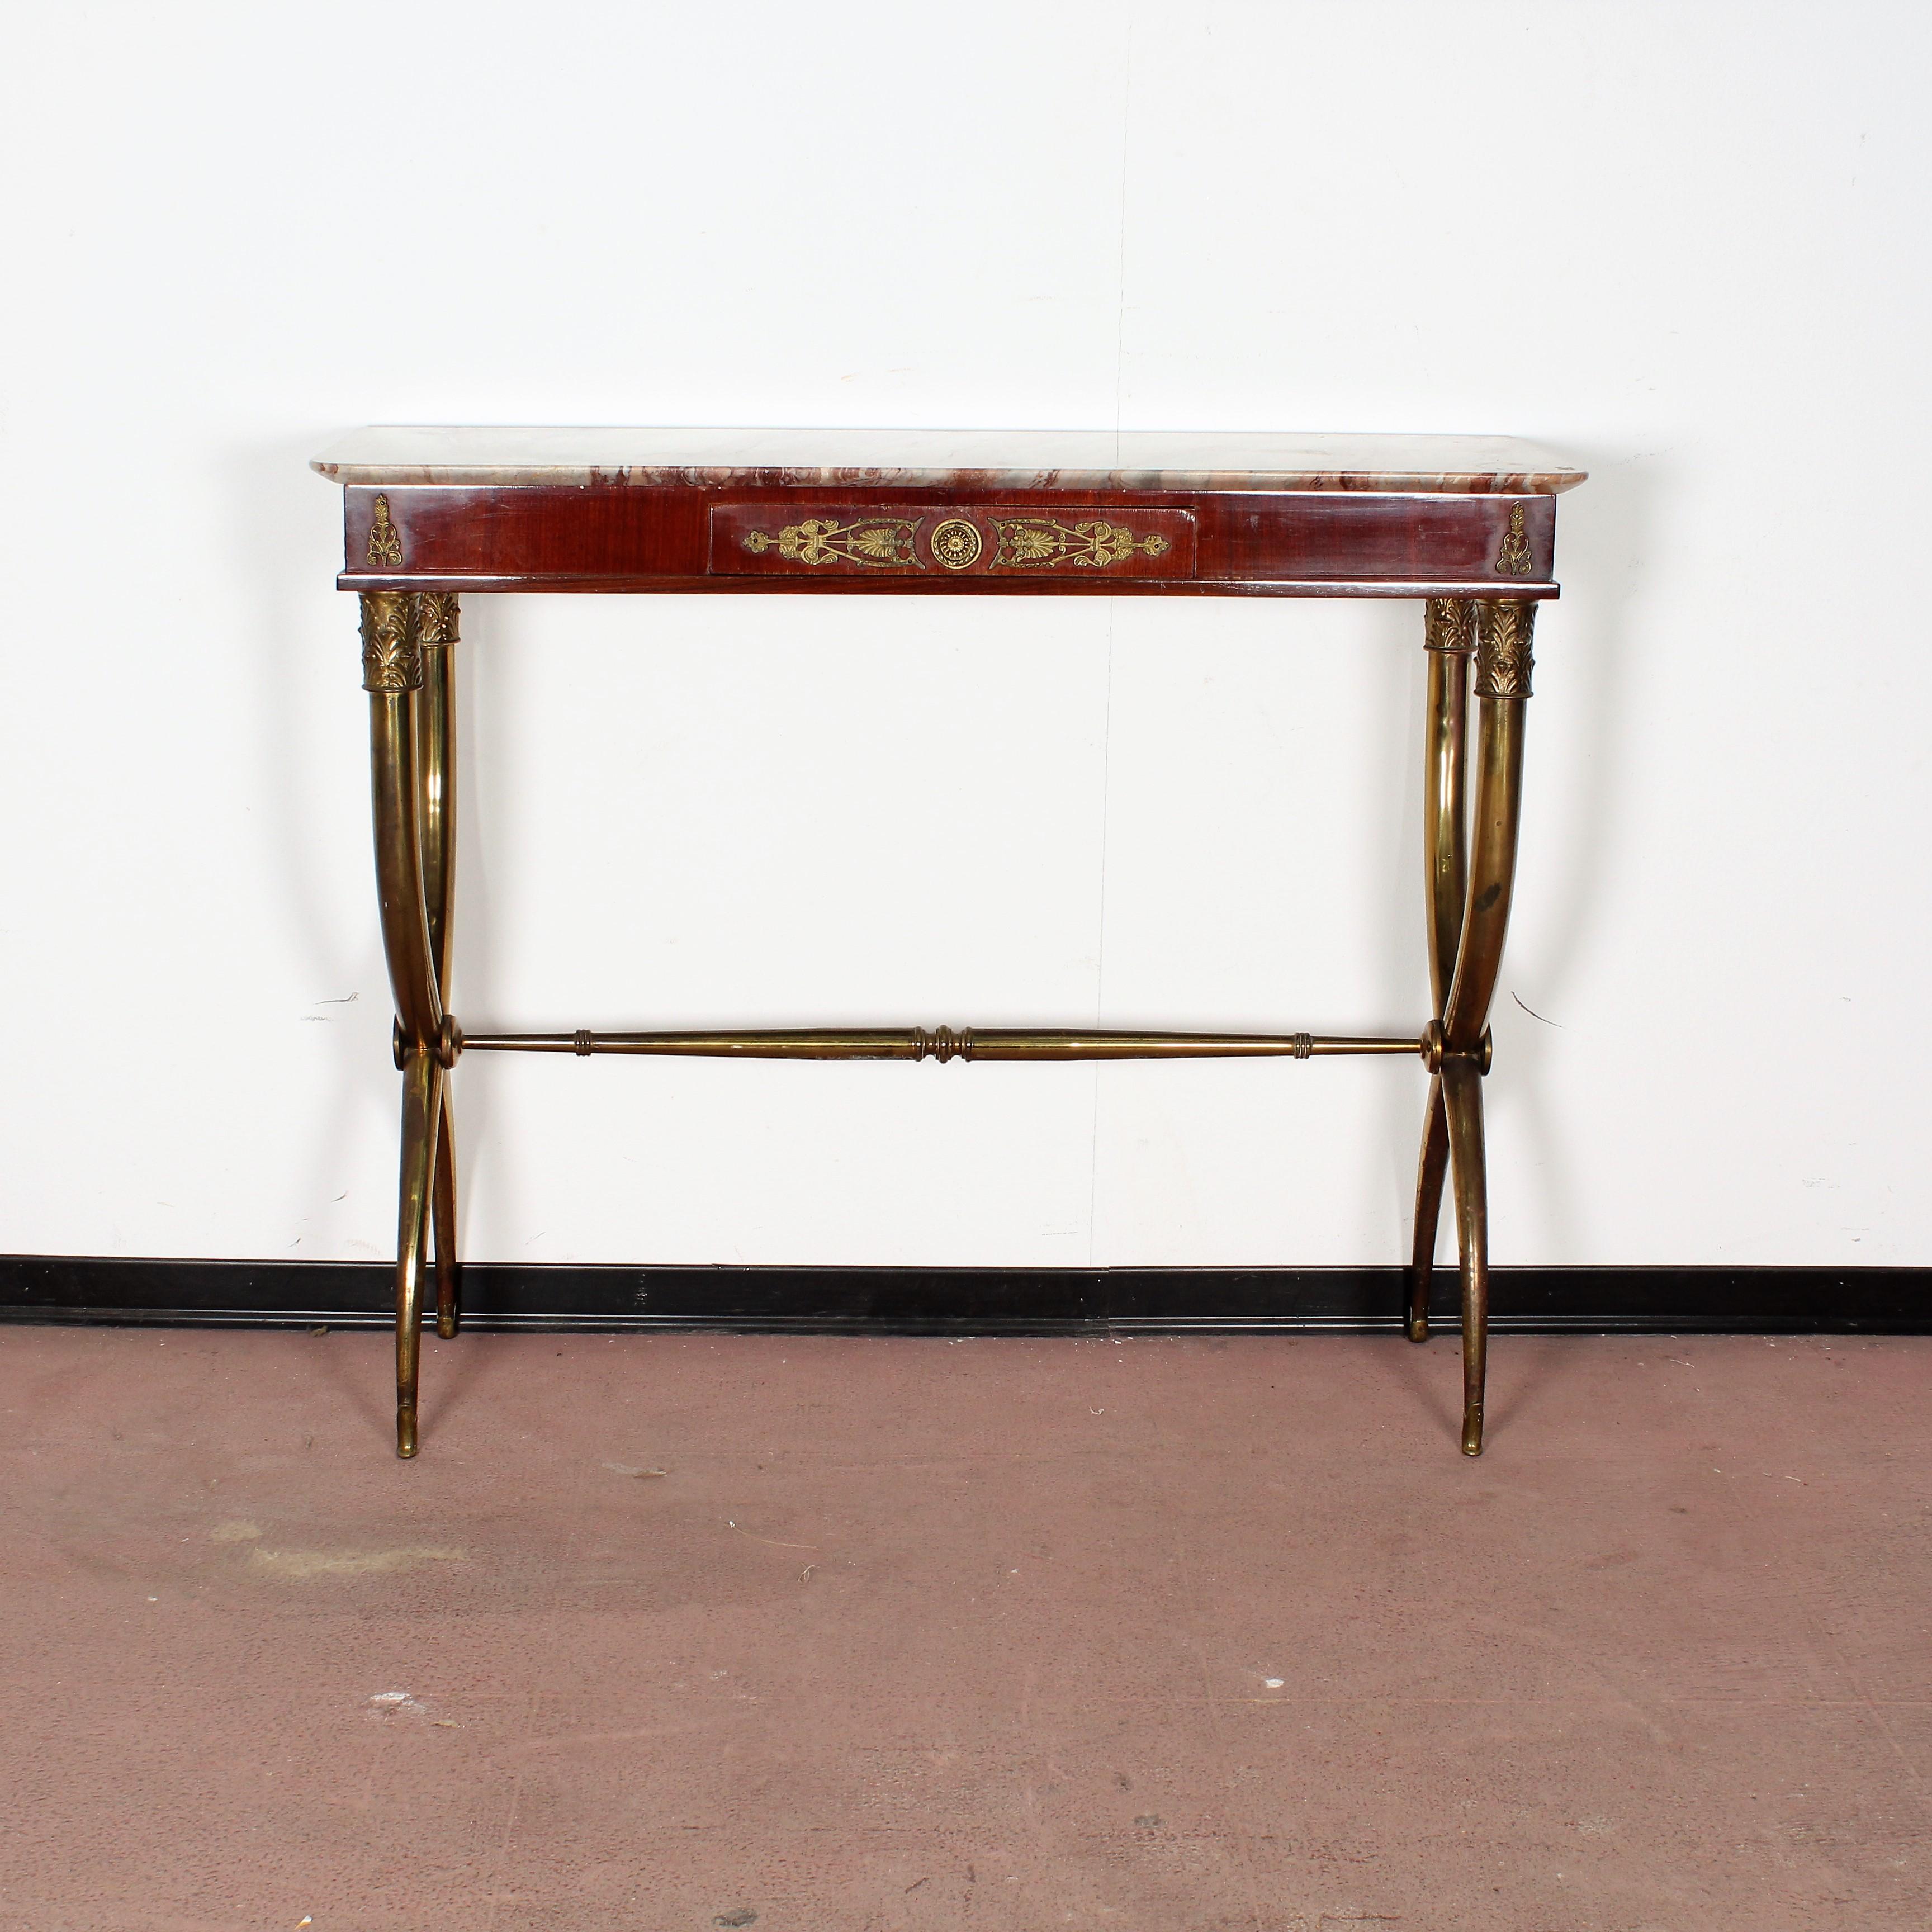 Console table in the style of Paolo Buffa made of shaped brass and wood with colored marble tops. produced in Cantu' circa 1950s.
Wear consistent with age and use.